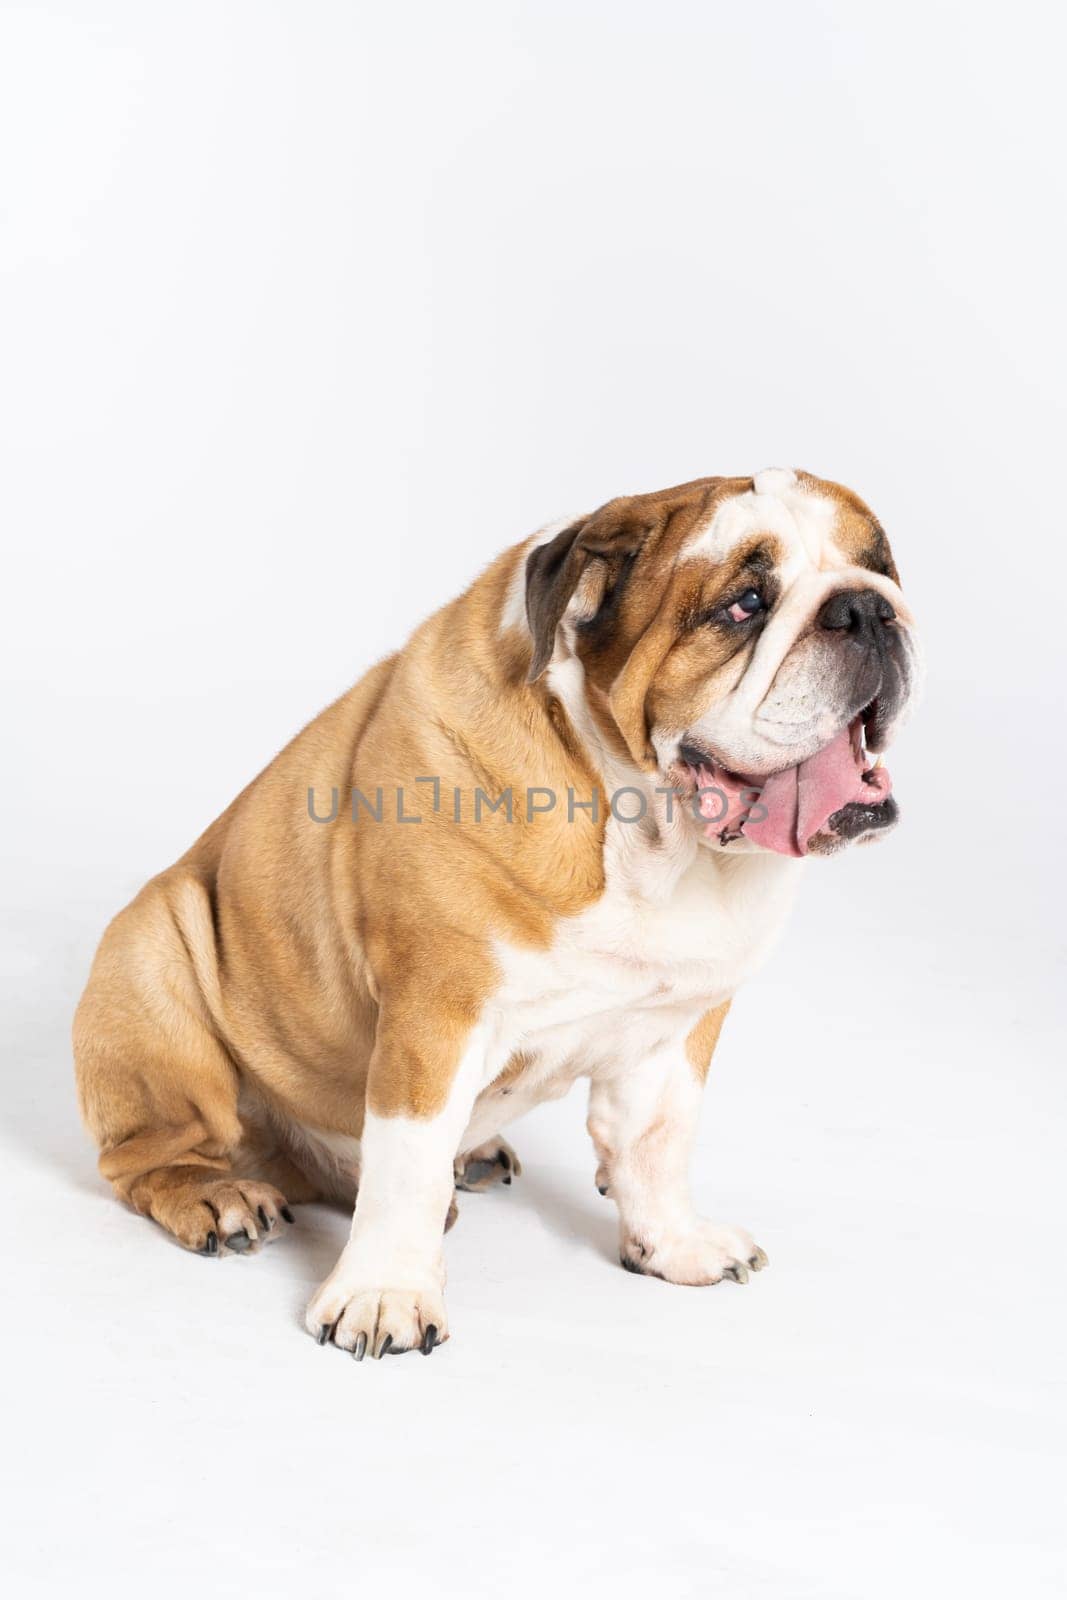 The dog is sitting and panting with its tongue outstretched. The English Bulldog was bred as a companion and deterrent dog. A breed with a brown coat with white patches.